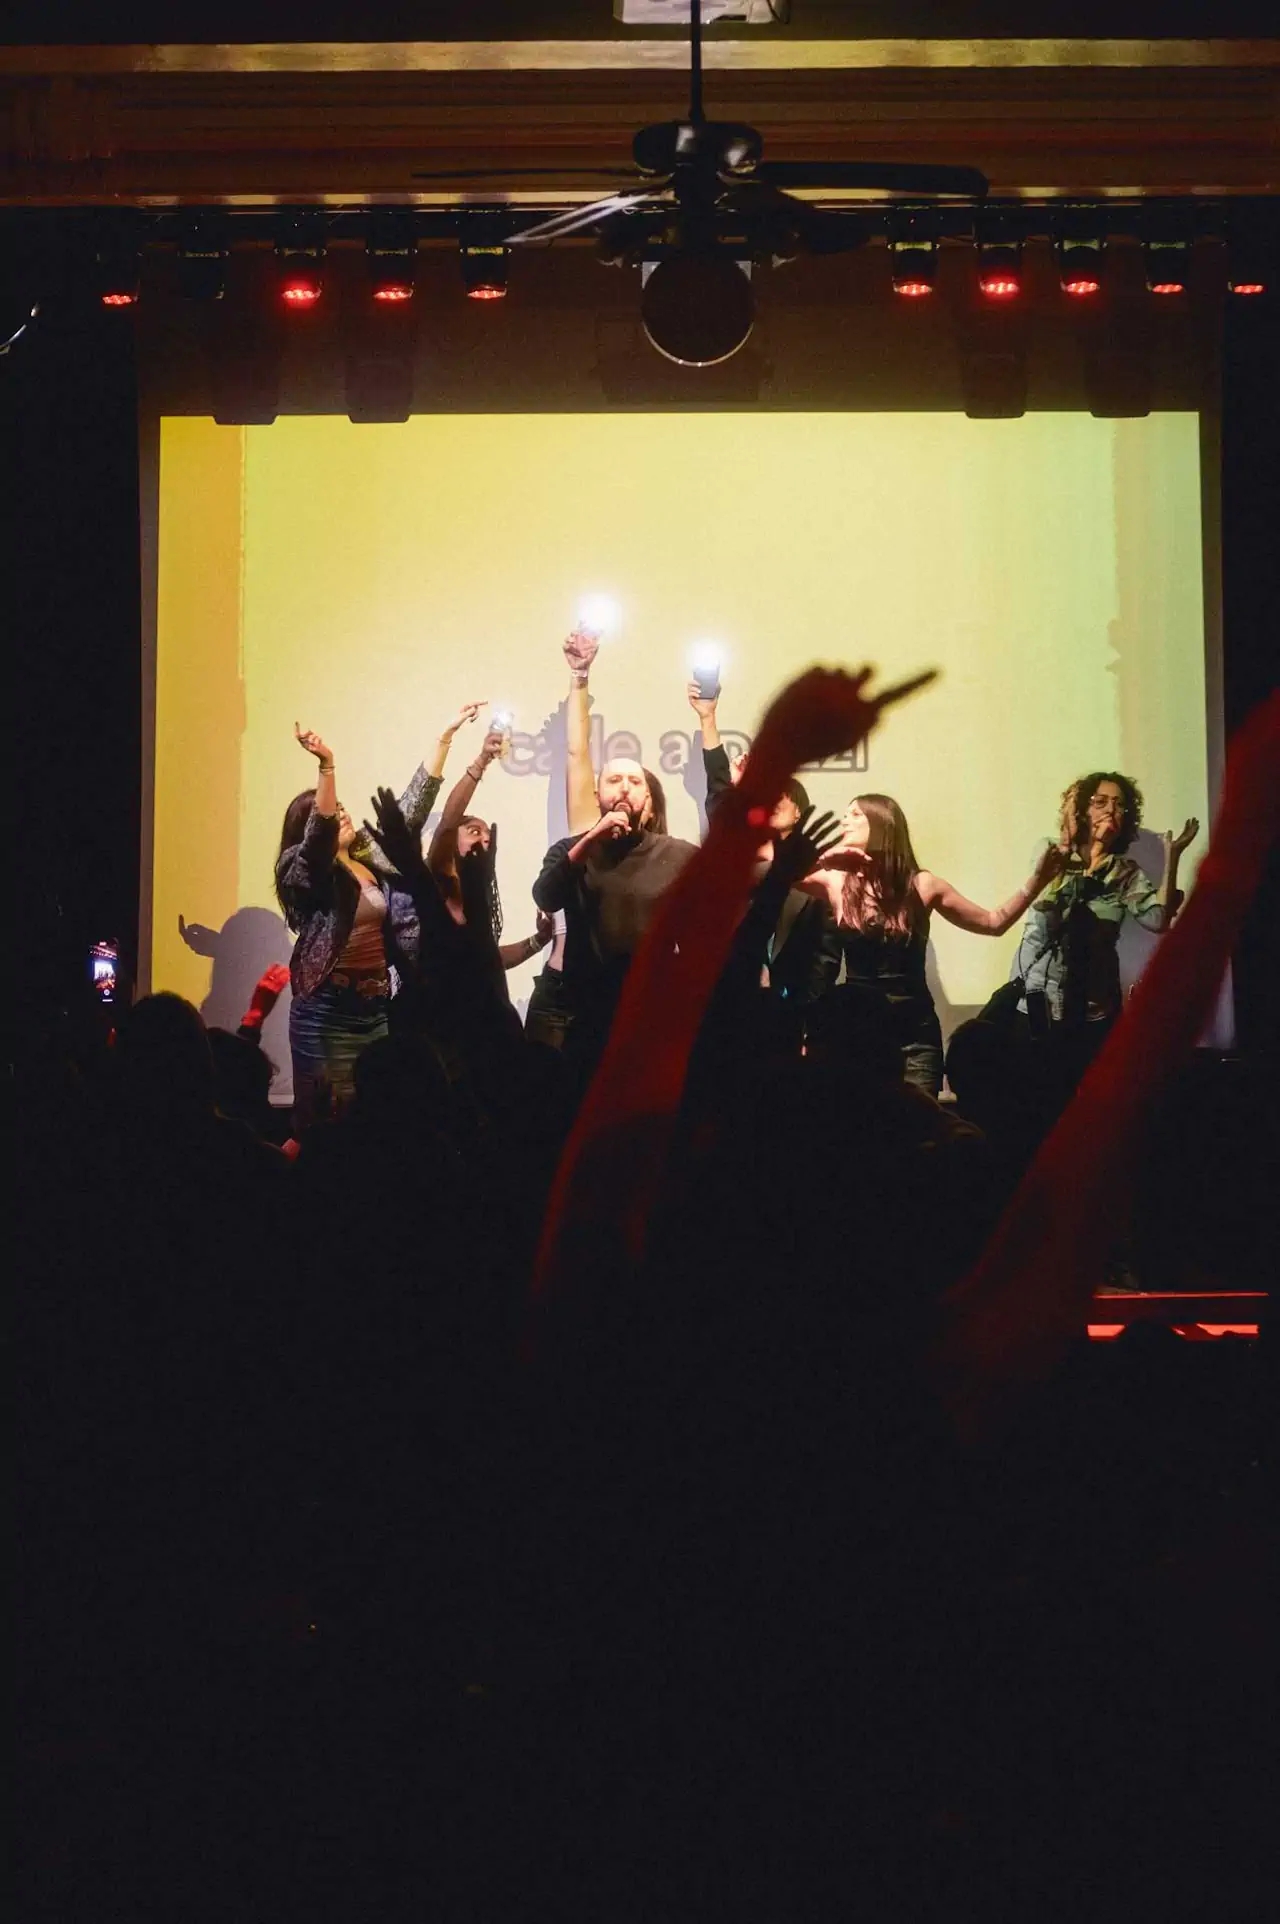 People chanting in front of a crowd, with a projected light behind, in a dark theater.